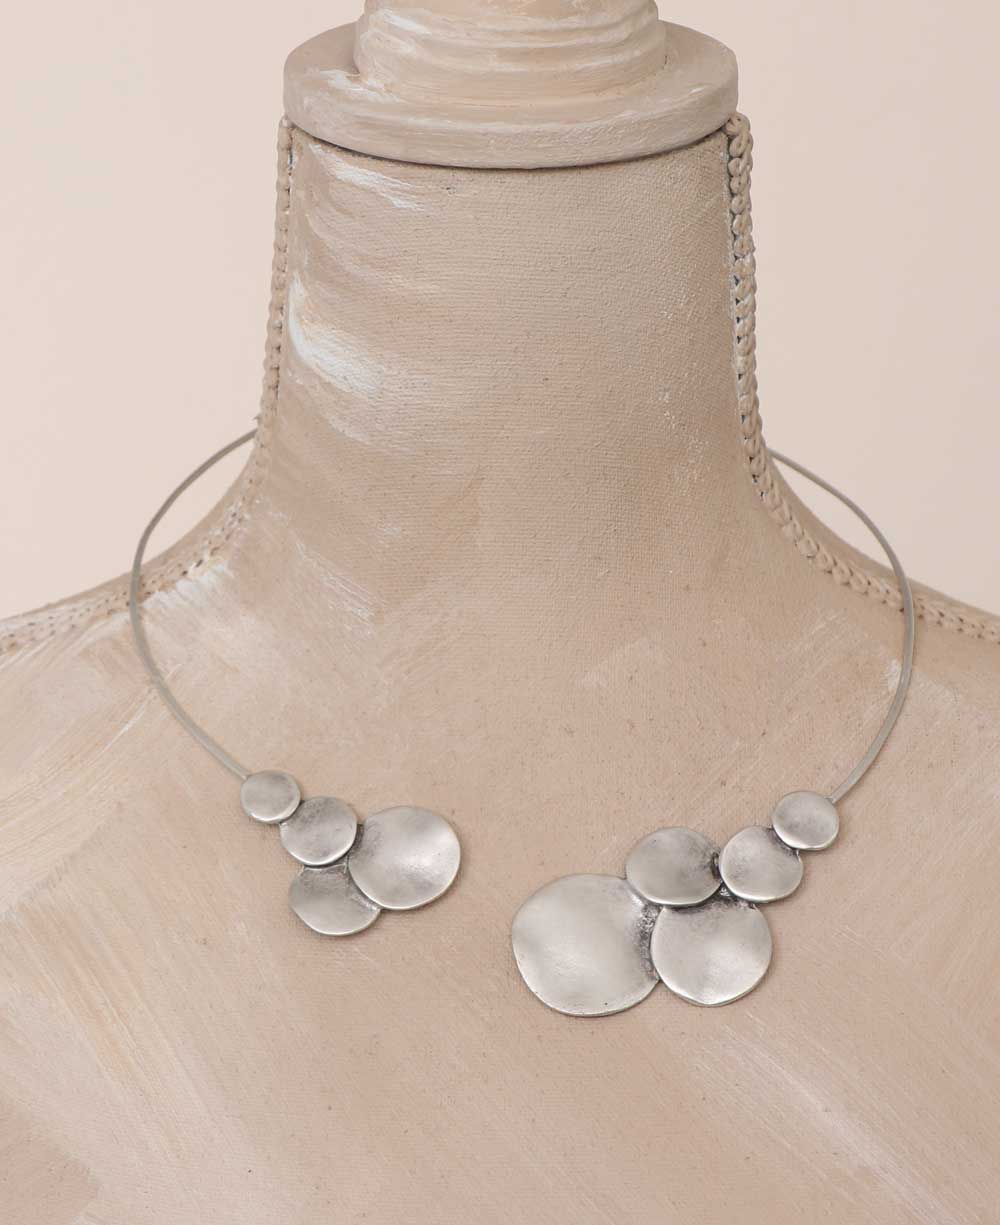 Pewter Collar Bone Necklace with Stacked Discs